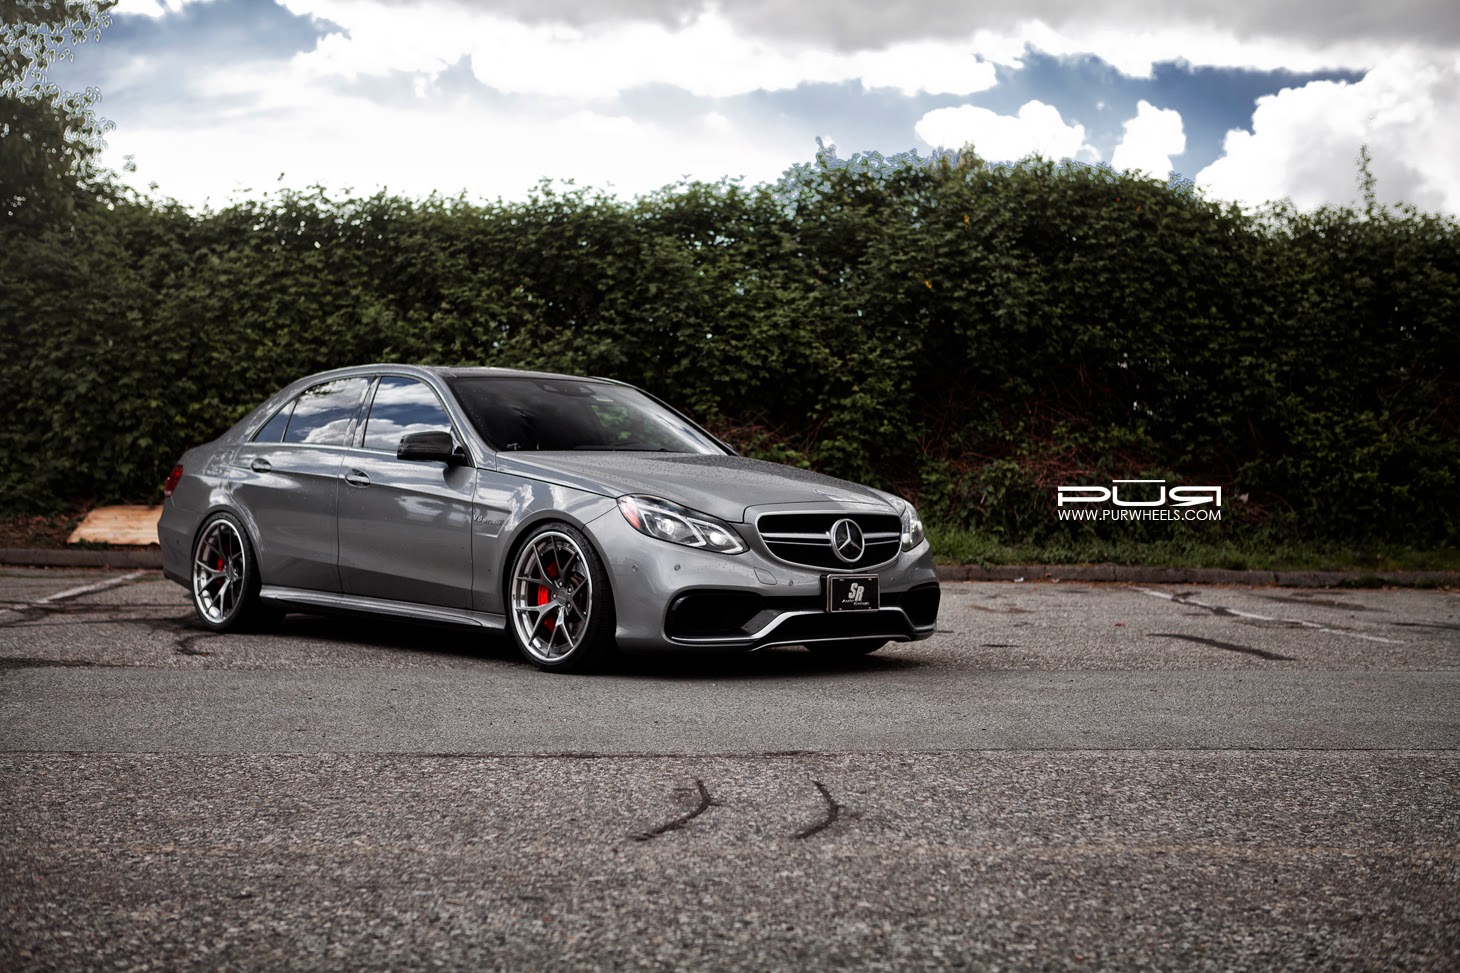 Mercedes-Benz W212 E63 AMG Facelift on PUR Wheels | BENZTUNING